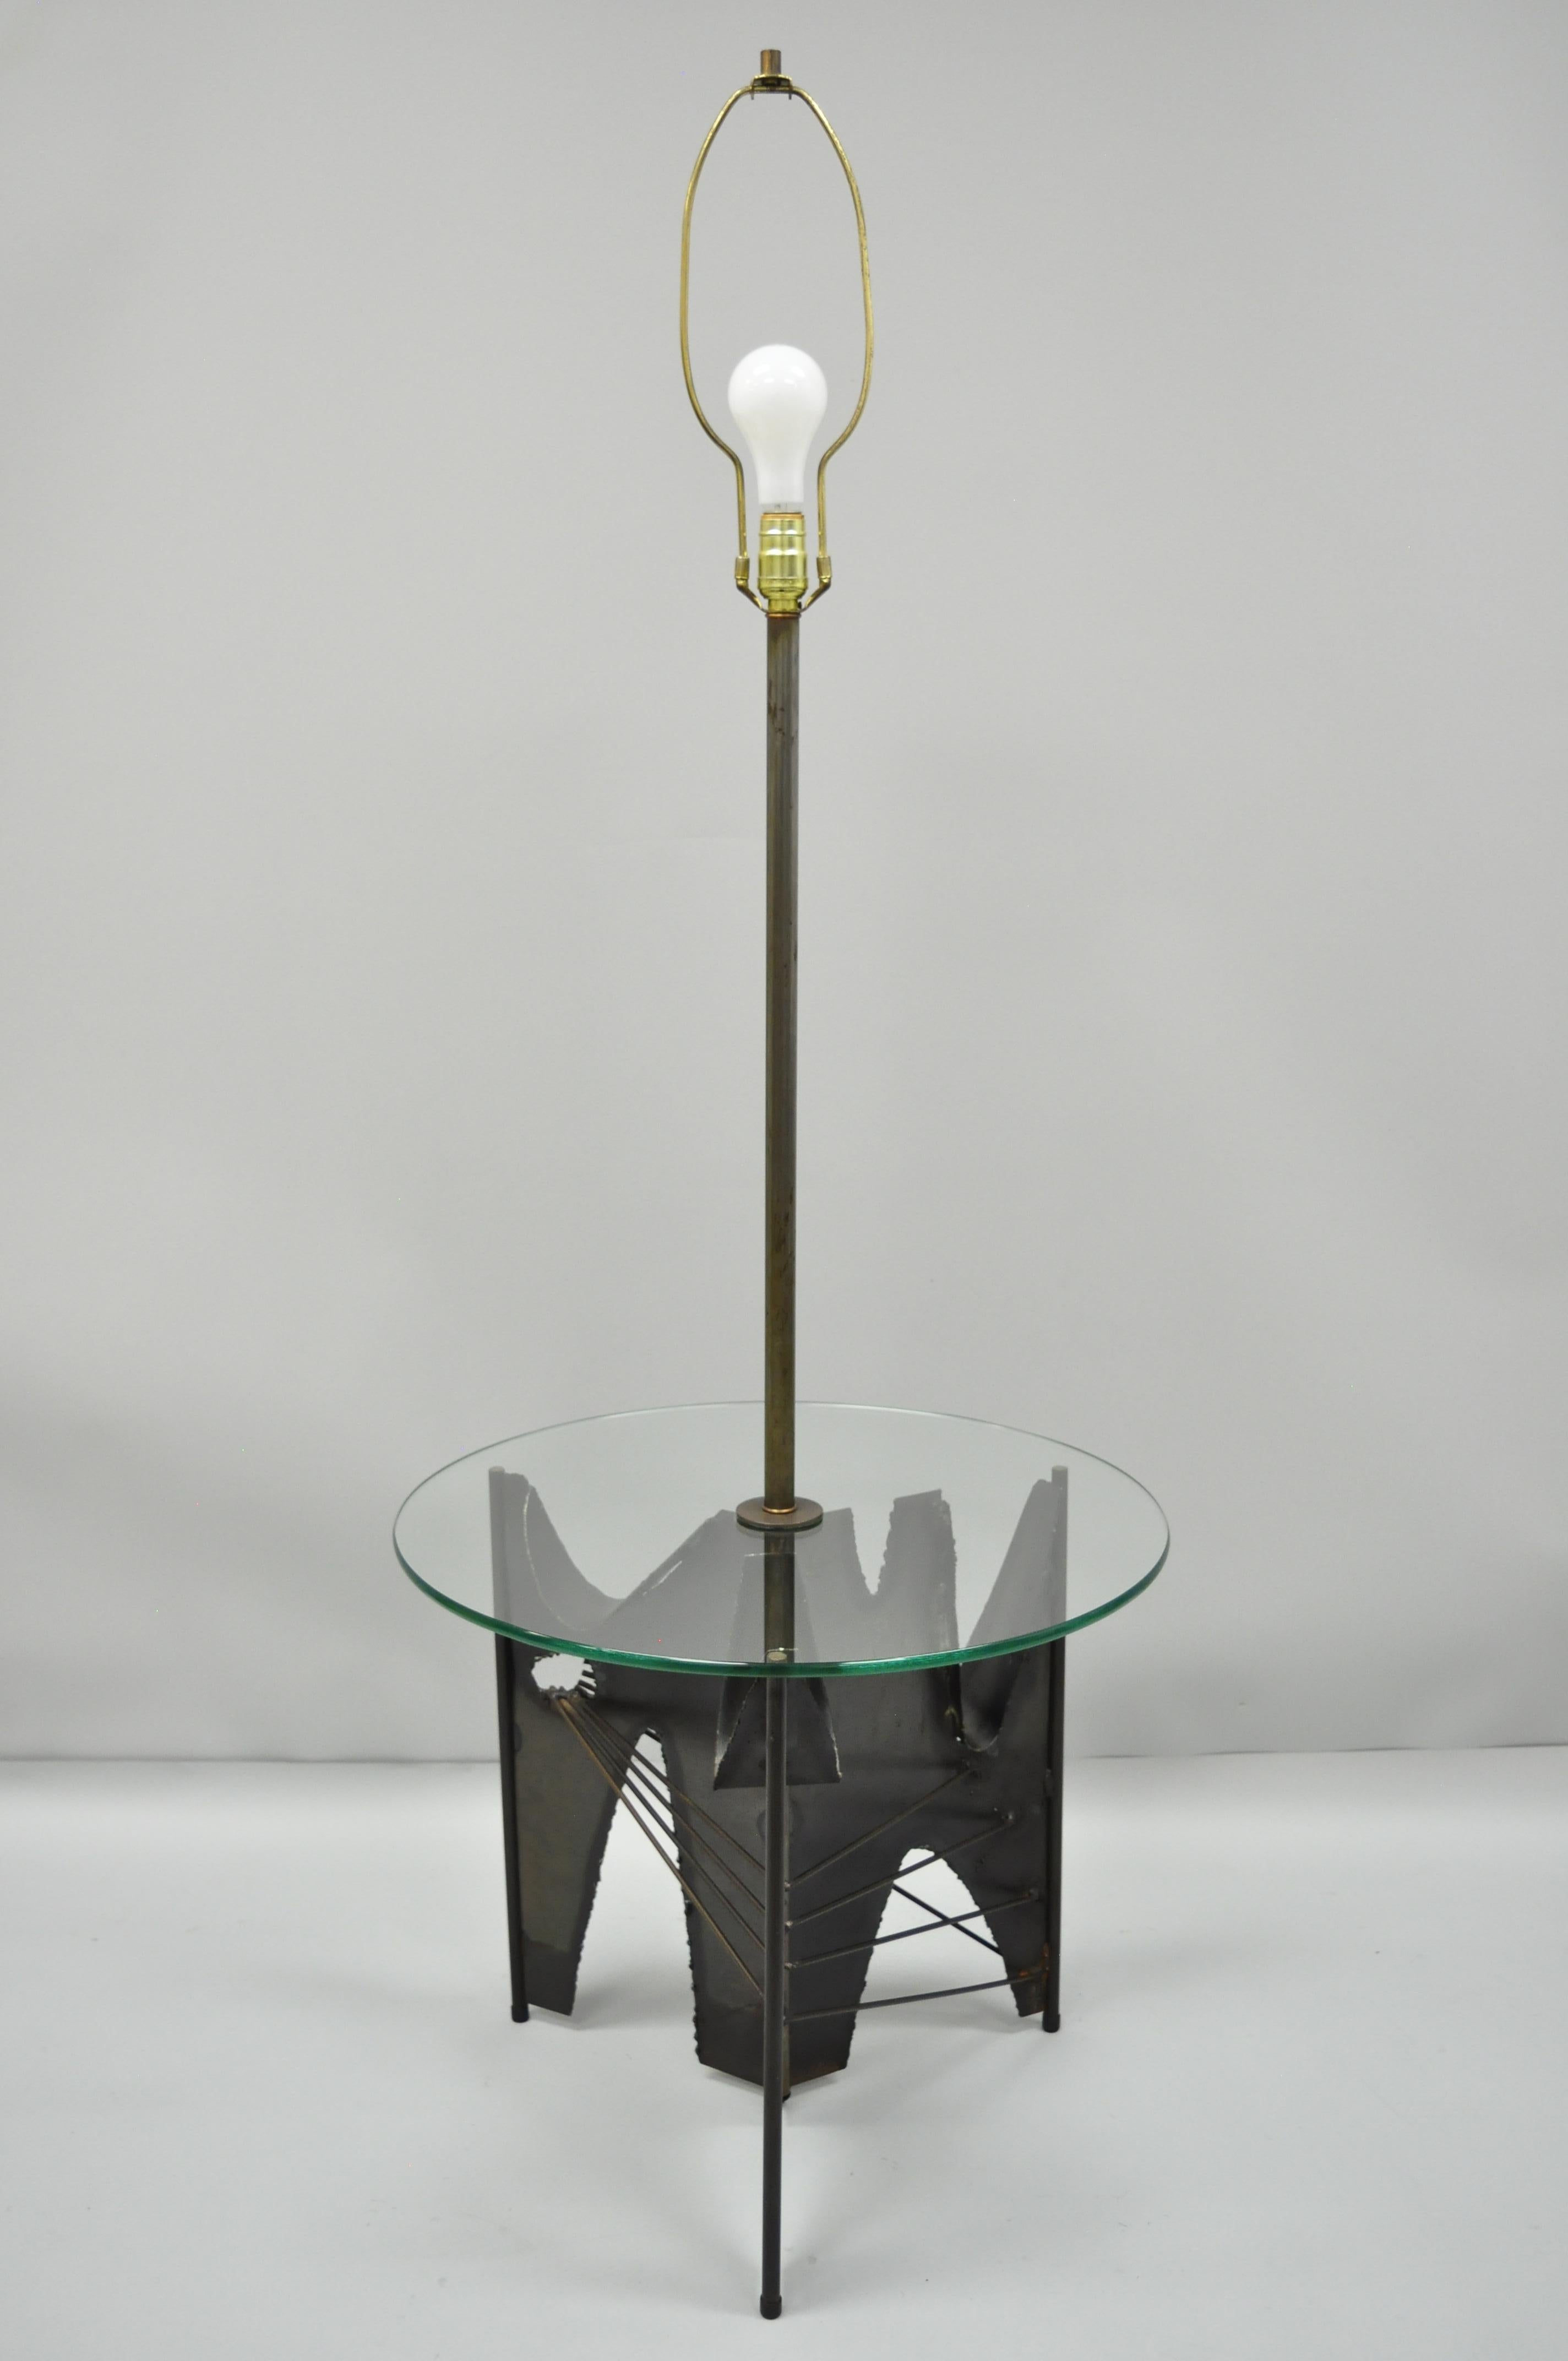 Vintage Mid-Century Modern Harry Balmer for Laurel Brutalist floor lamp side table. Item features three-way switch, steel metal Brutalist tripod base, round glass surface, great style and form, circa mid-20th century. Measurements: 59